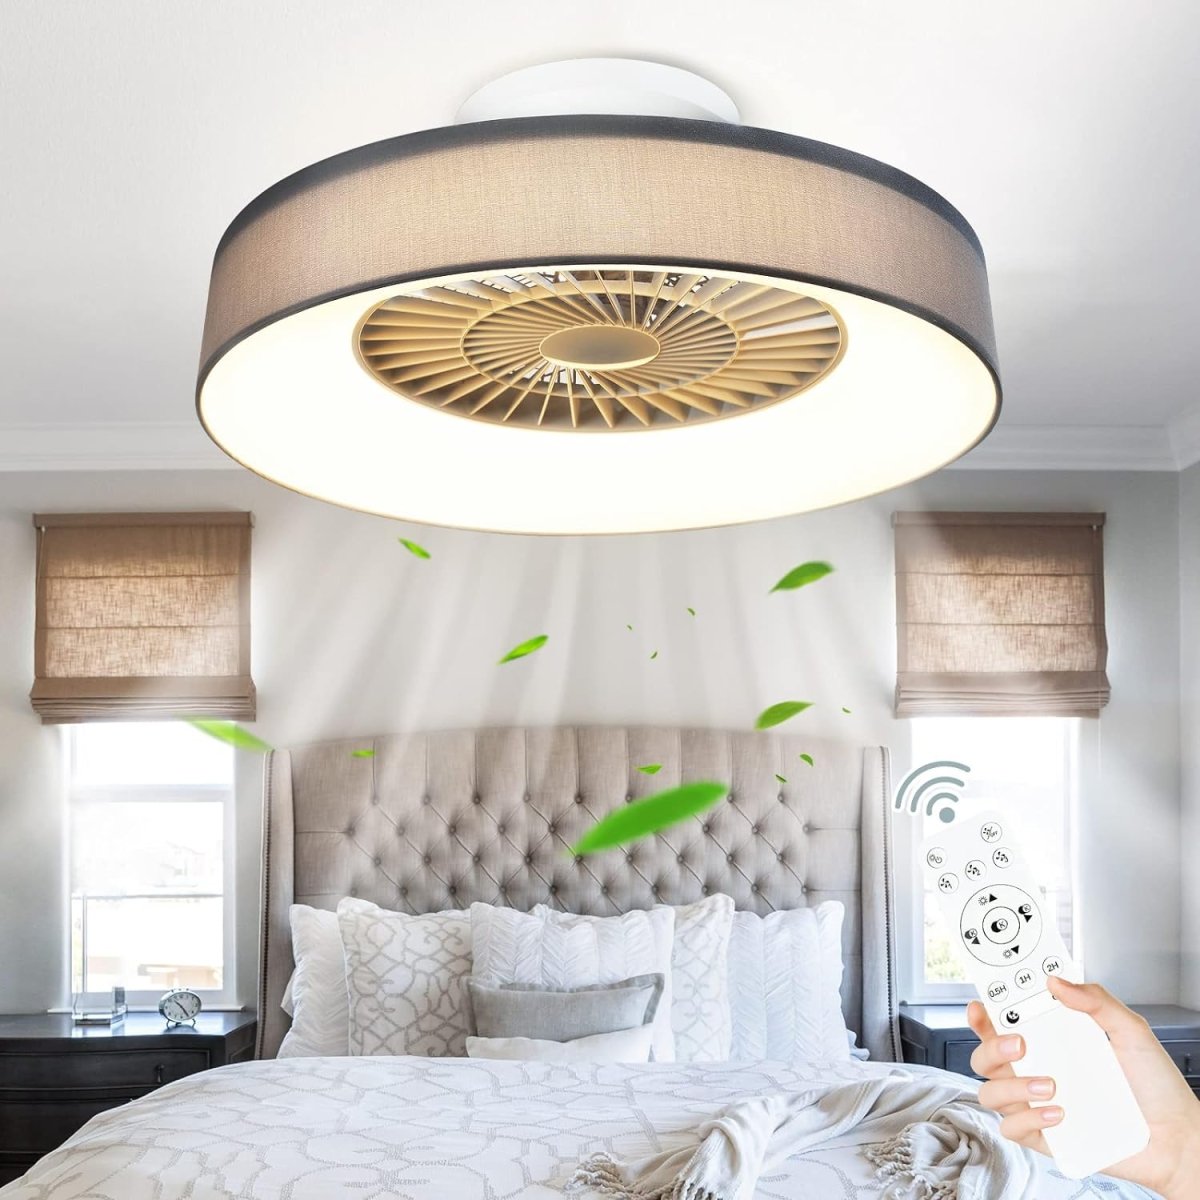 DLLT Low Profile Ceiling Fan with Light, 22.5'' LED Dimmable Ceiling Fans with Lights and Remote, Modern Bladeless Enclosed Ceiling Fan Flush Mount with Reverse Motor for Bedroom Living Room, Gray - WS-FPZ47-40C-GY 2 | DEPULEY